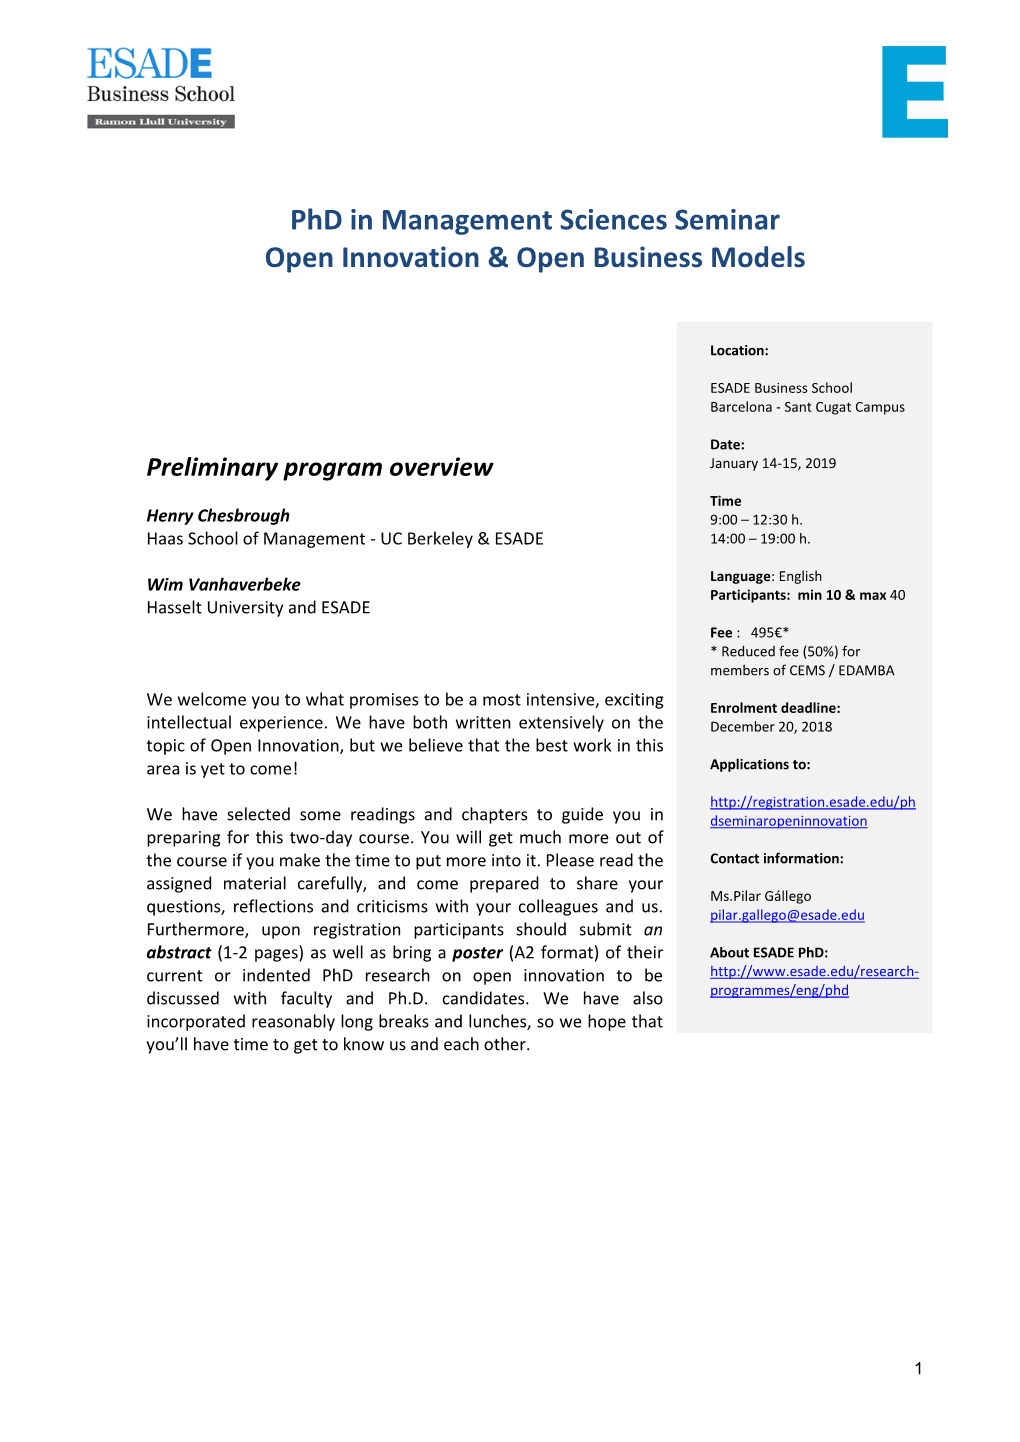 Phd in Management Sciences Seminar Open Innovation & Open Business Models